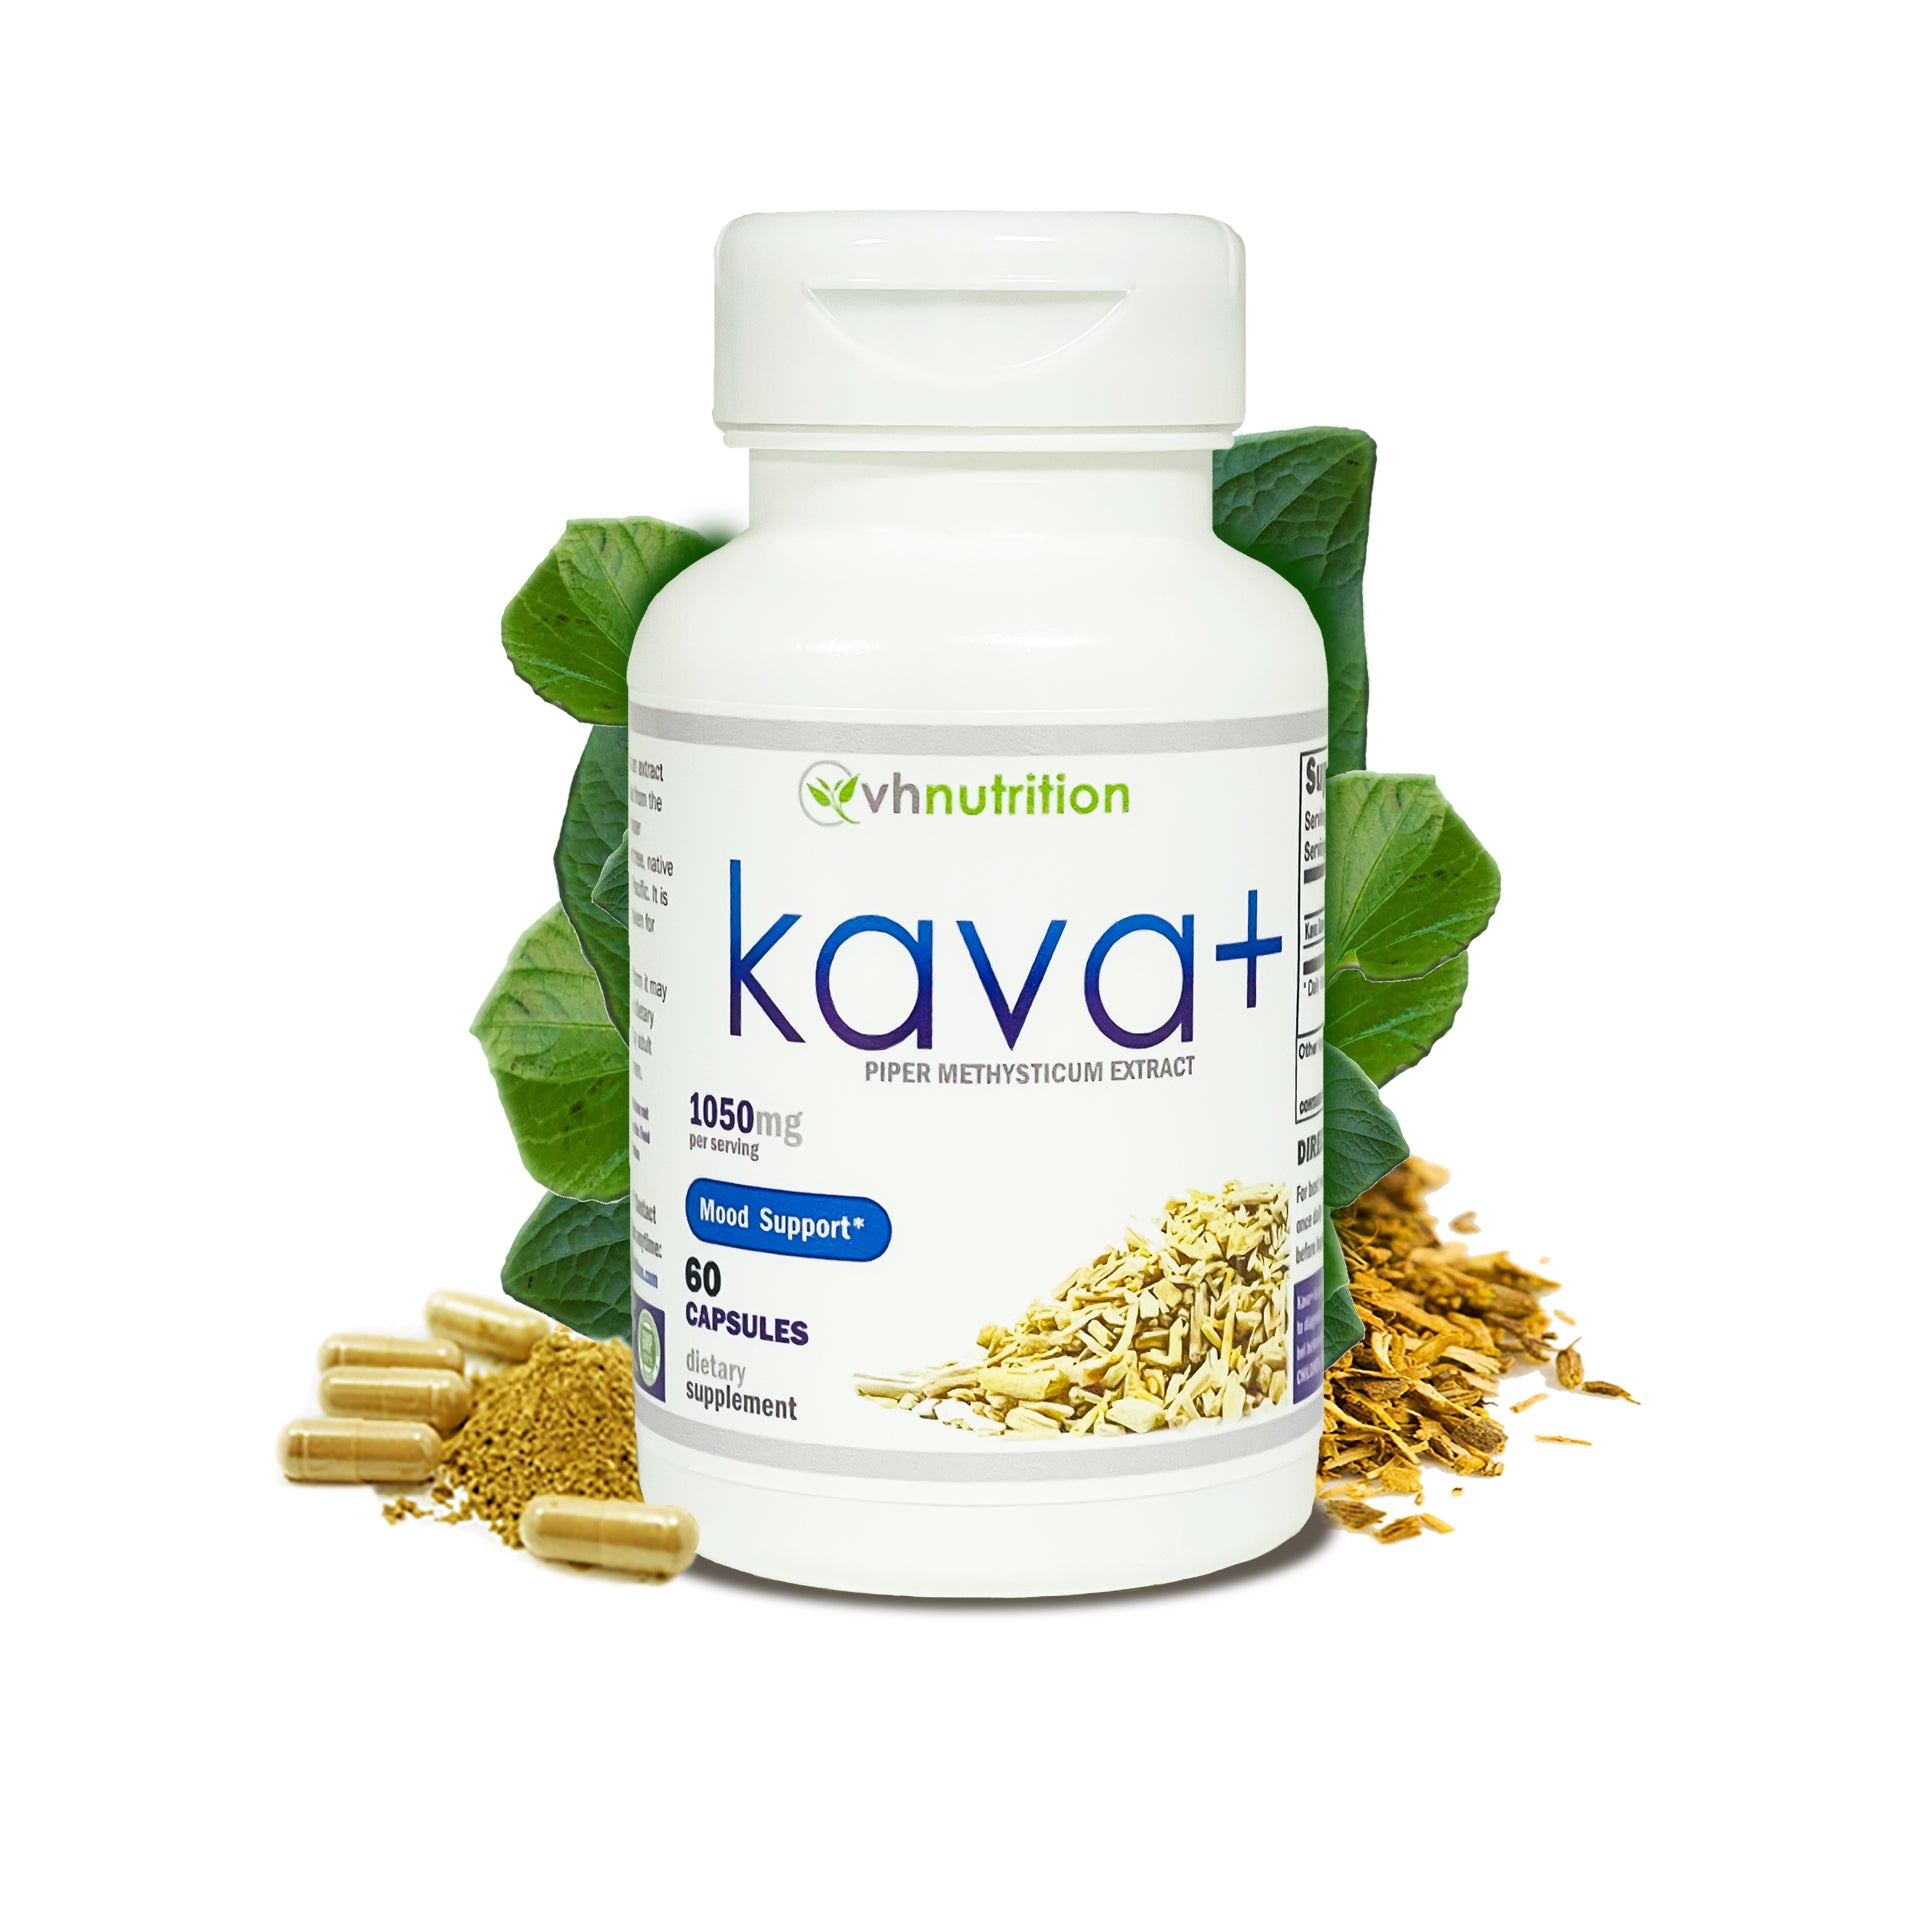 VH Nutrition RELAX STACK | Natural Stress & Mood Support* | Gotu Kola, Kava+, Passion Flower | 25% OFF our Regular Price